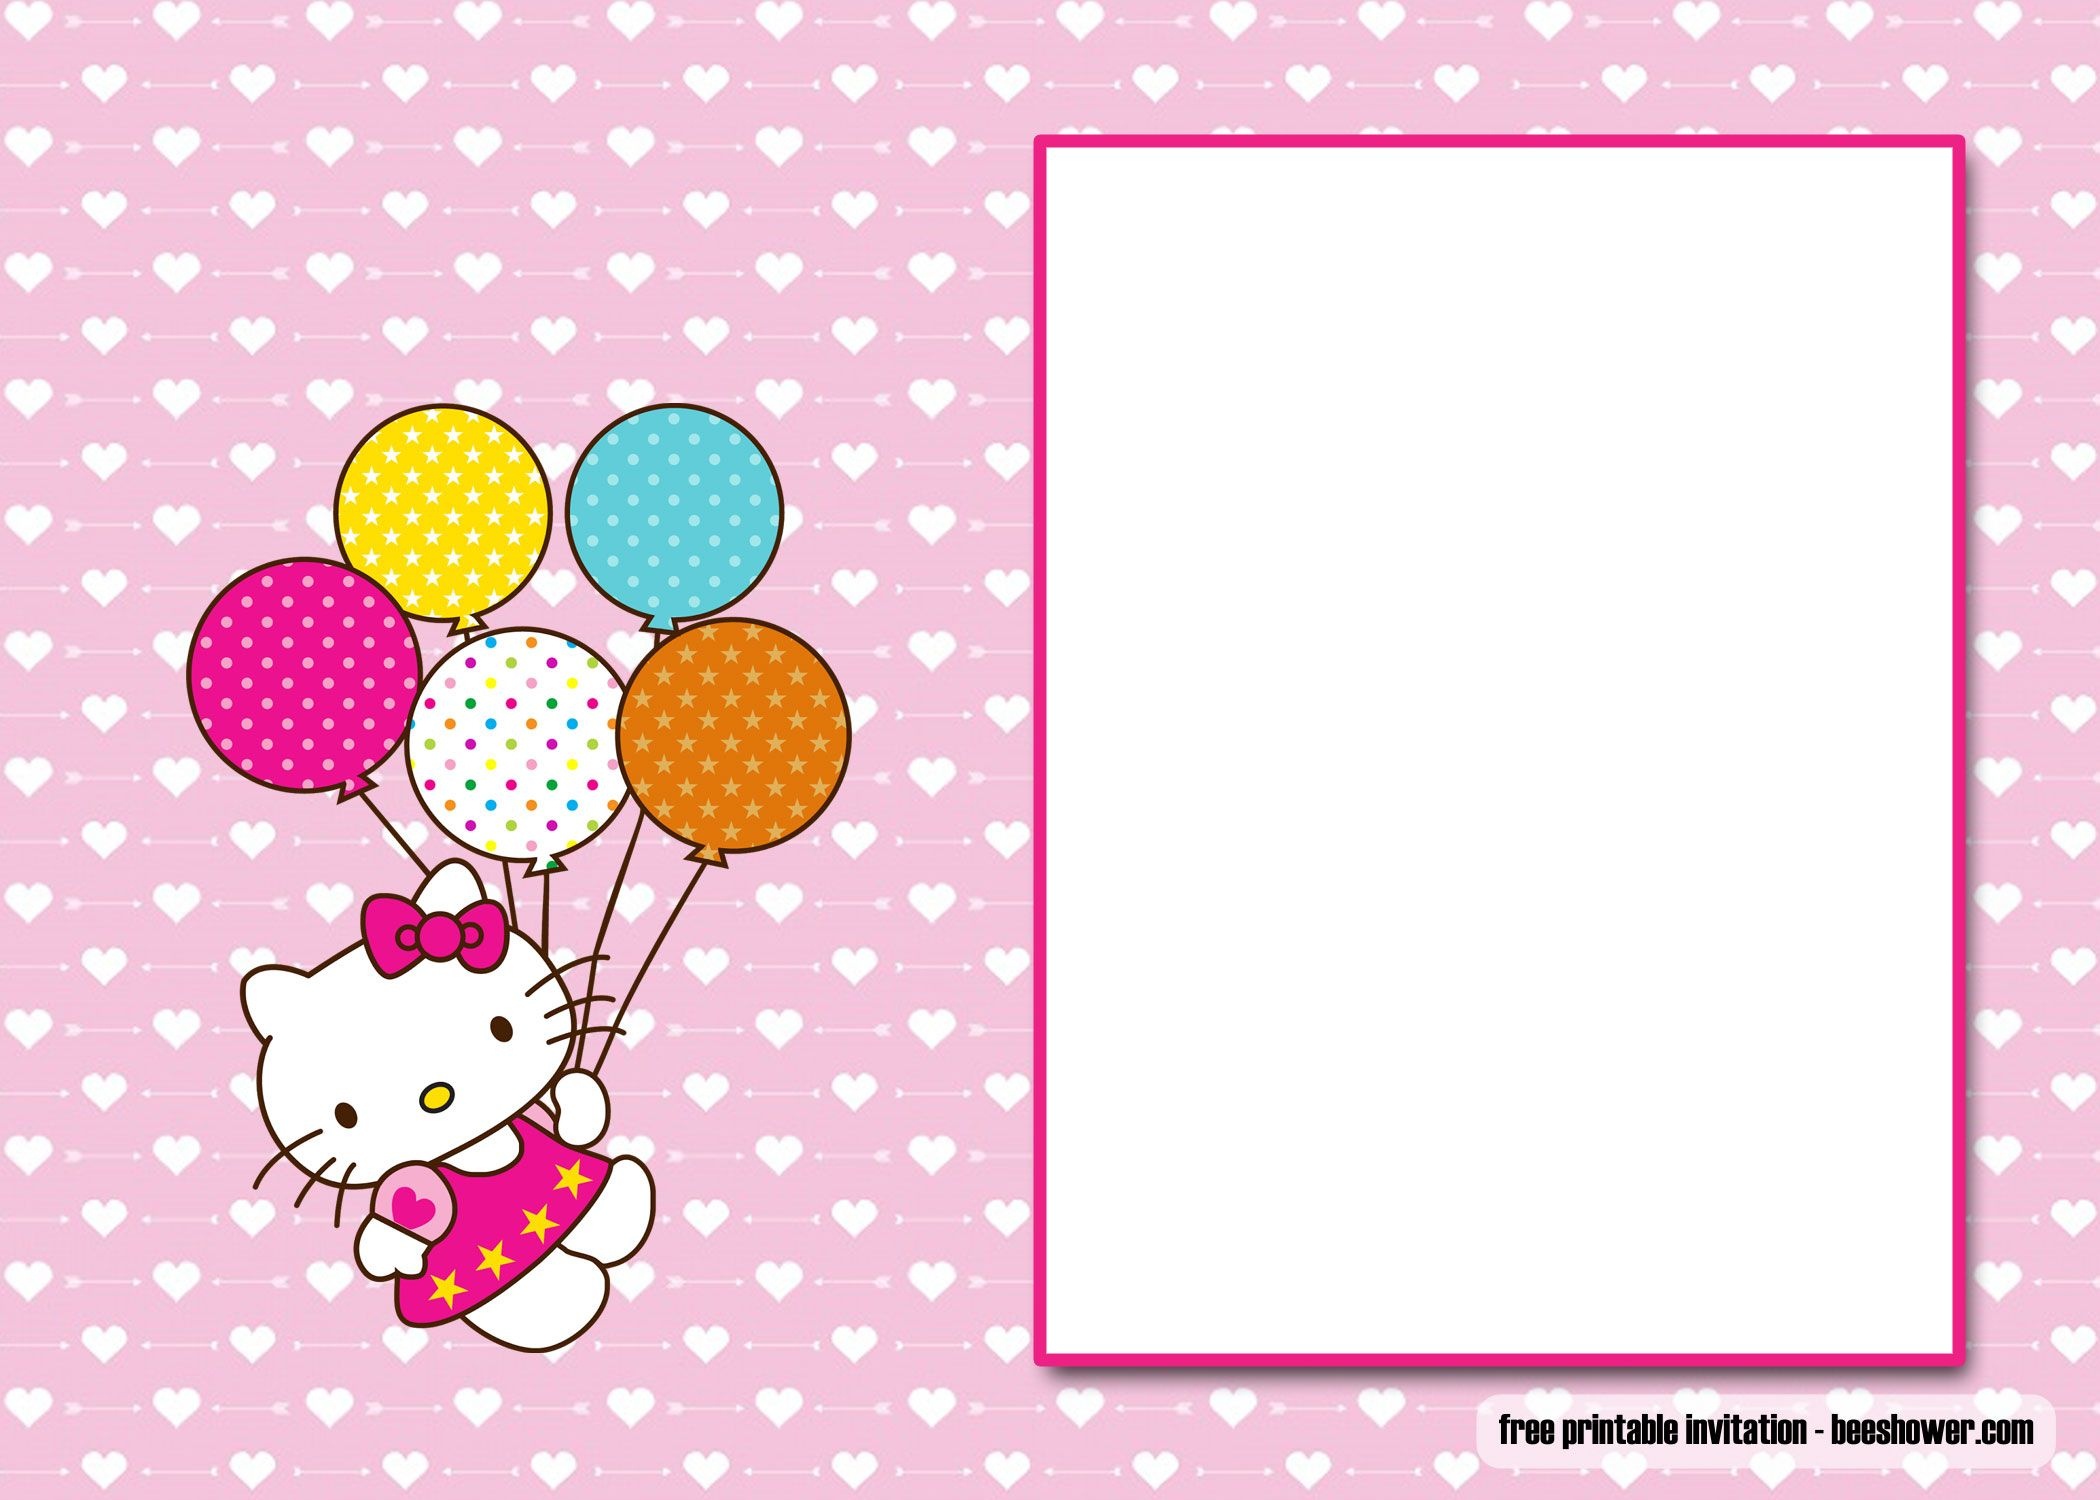 Awesome Free Perfect Hello Kitty Baby Shower Invitations | Beeshower - Free Printable Hello Kitty Baby Shower Invitations